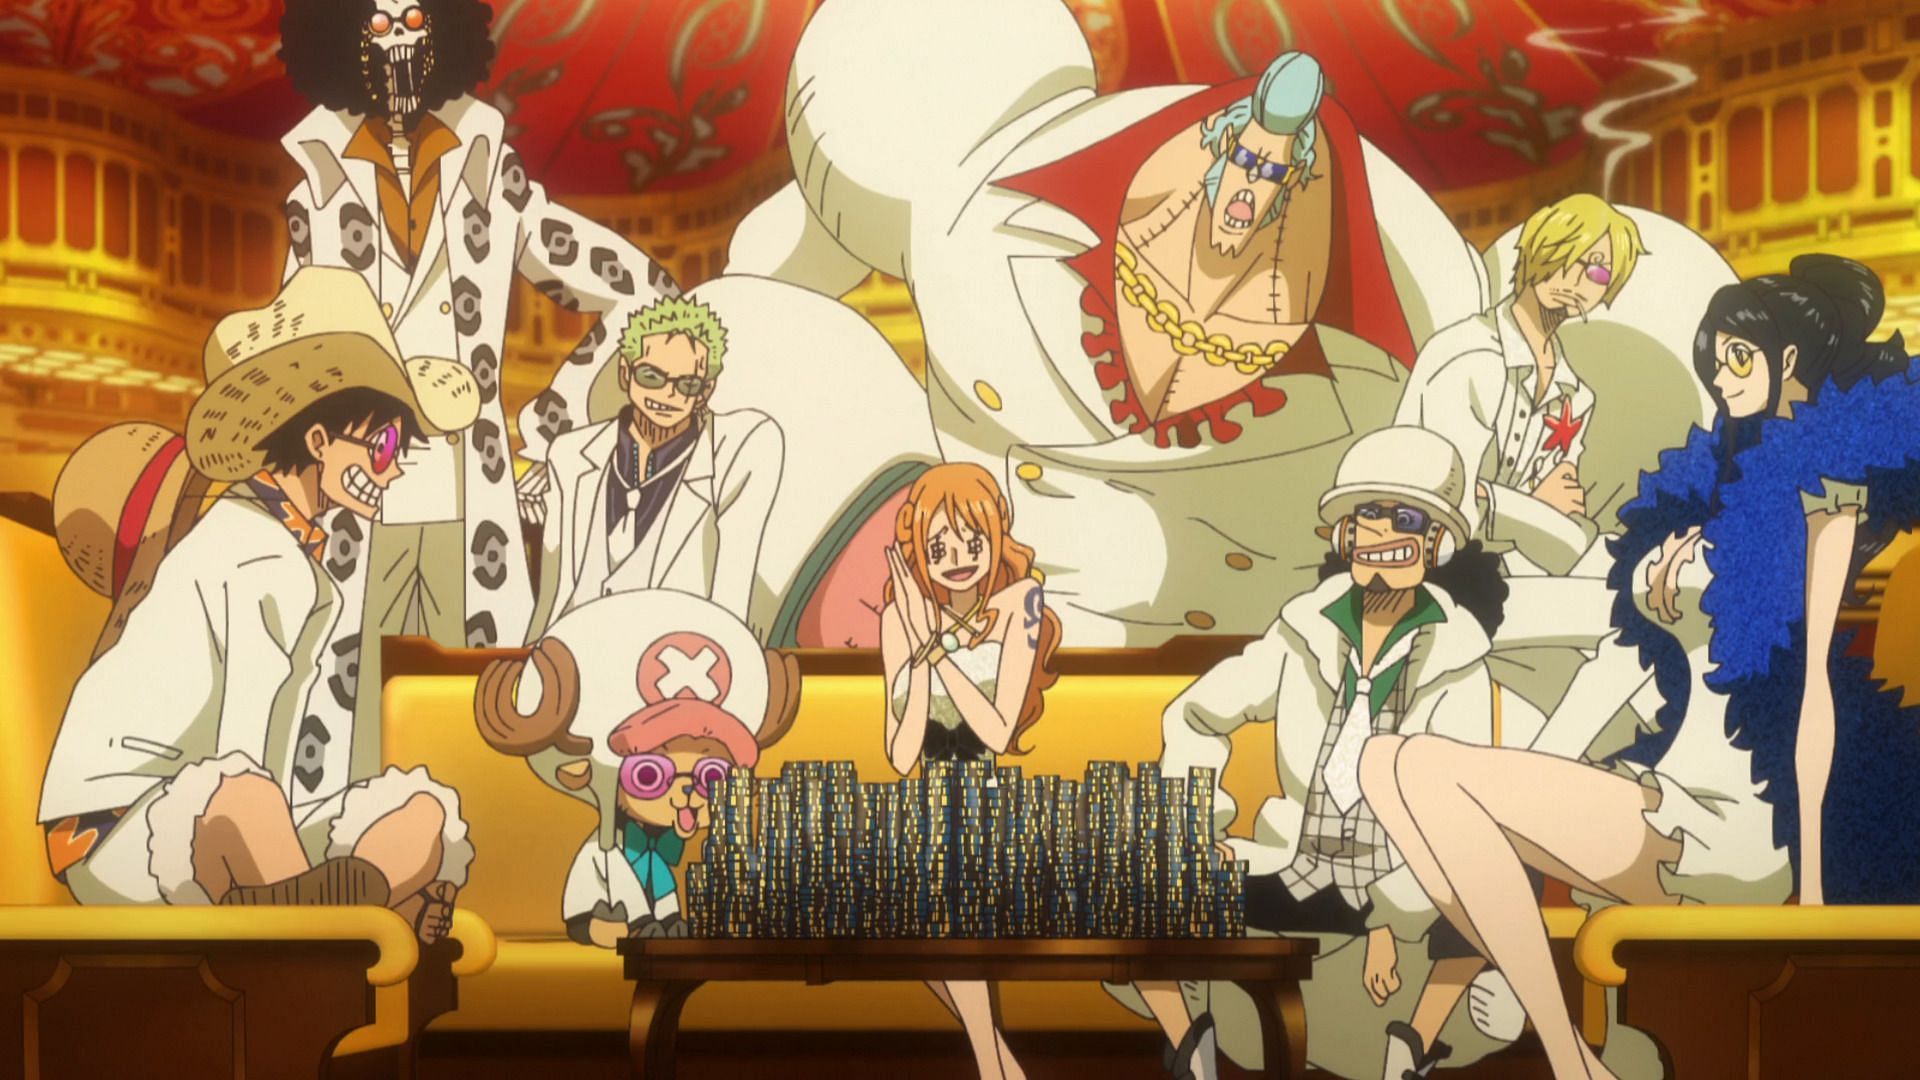 Every One Piece Movie Ranked Worst To Best